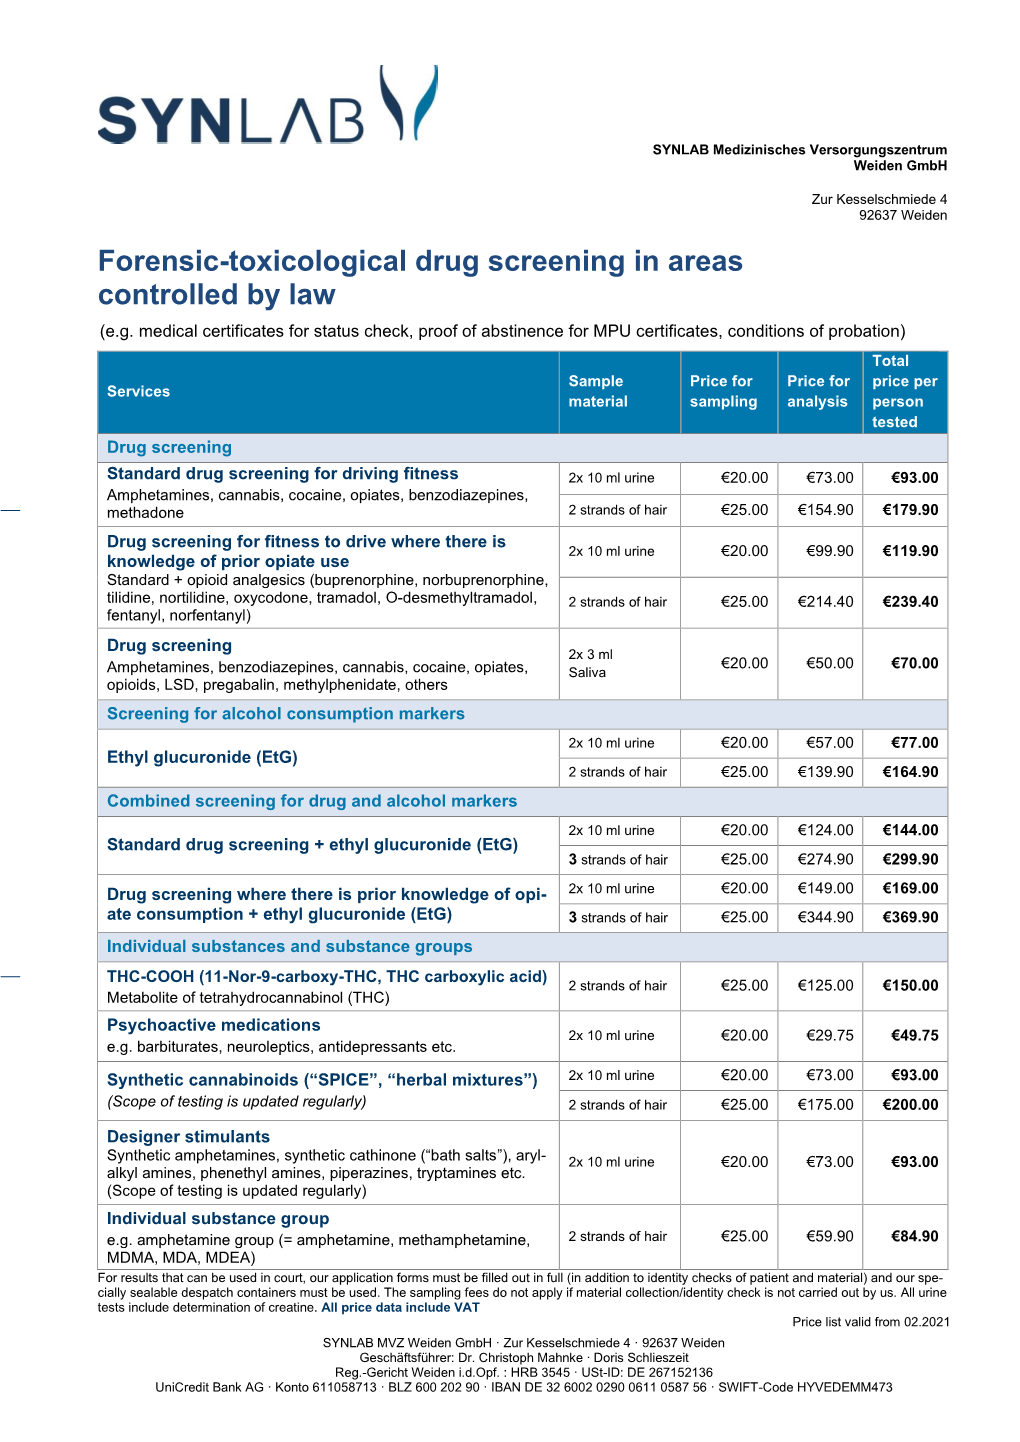 Forensic-Toxicological Drug Screening in Areas Controlled by Law (E.G